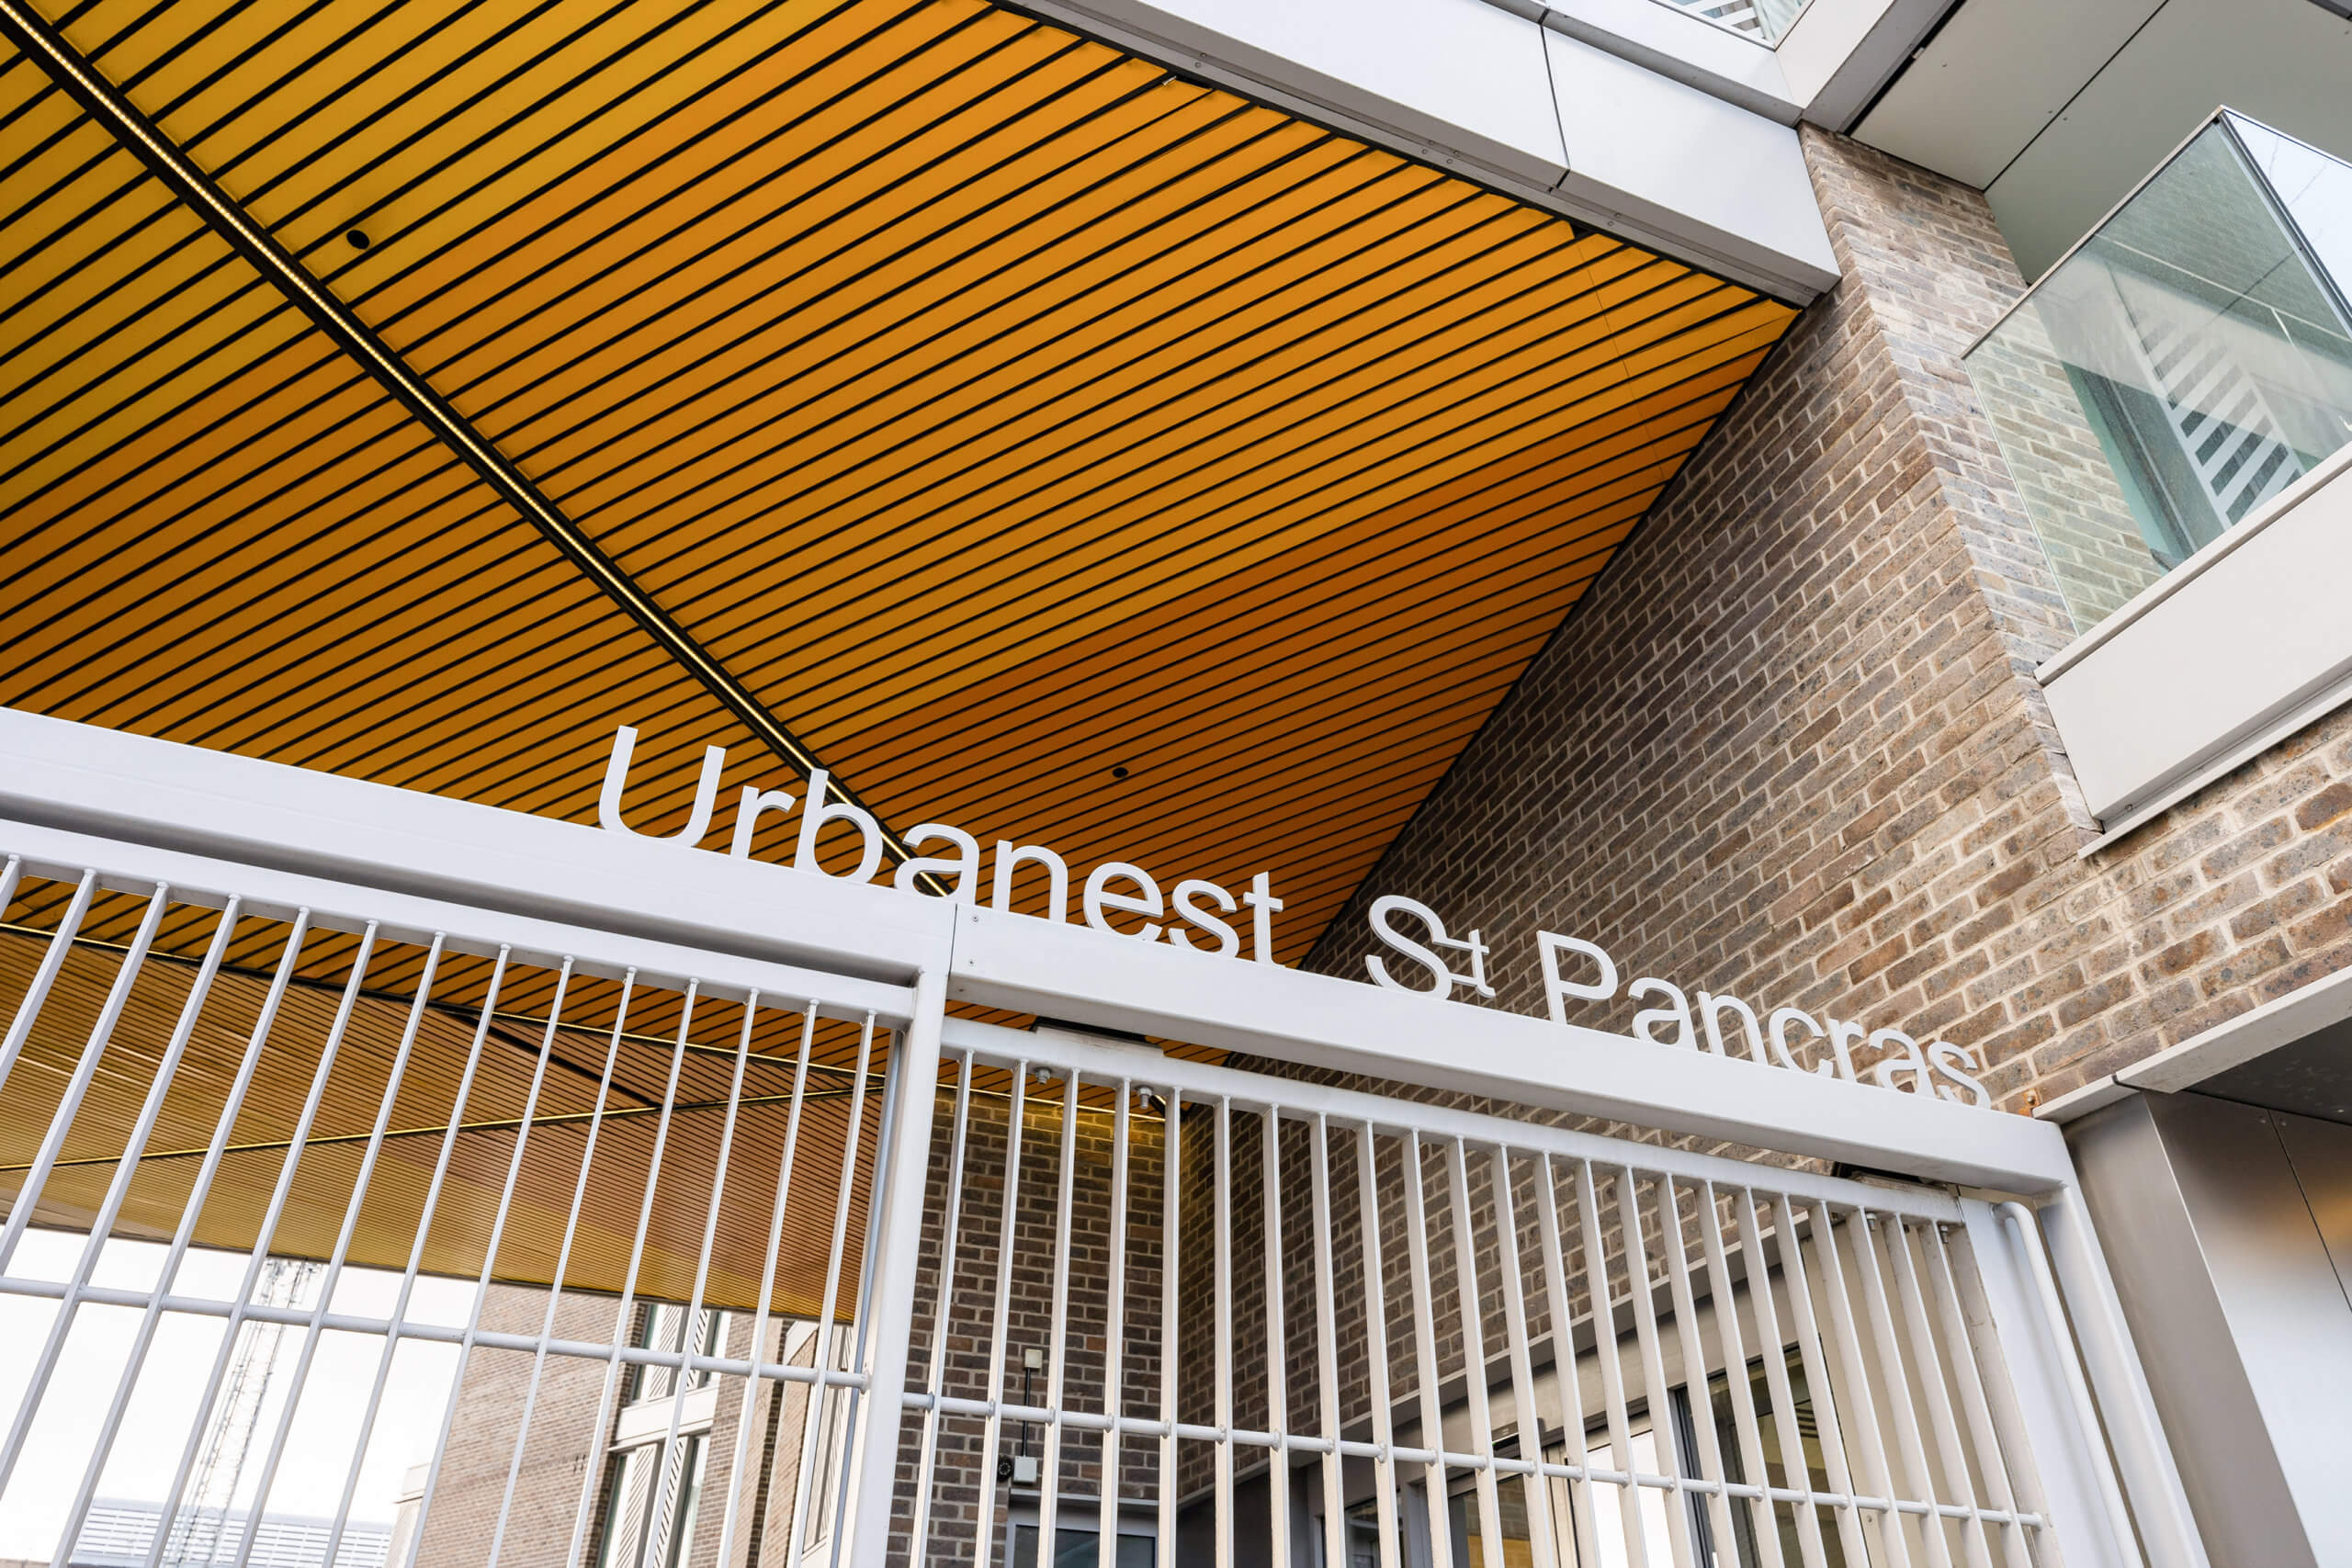 The entryway to urbanest St Pancras